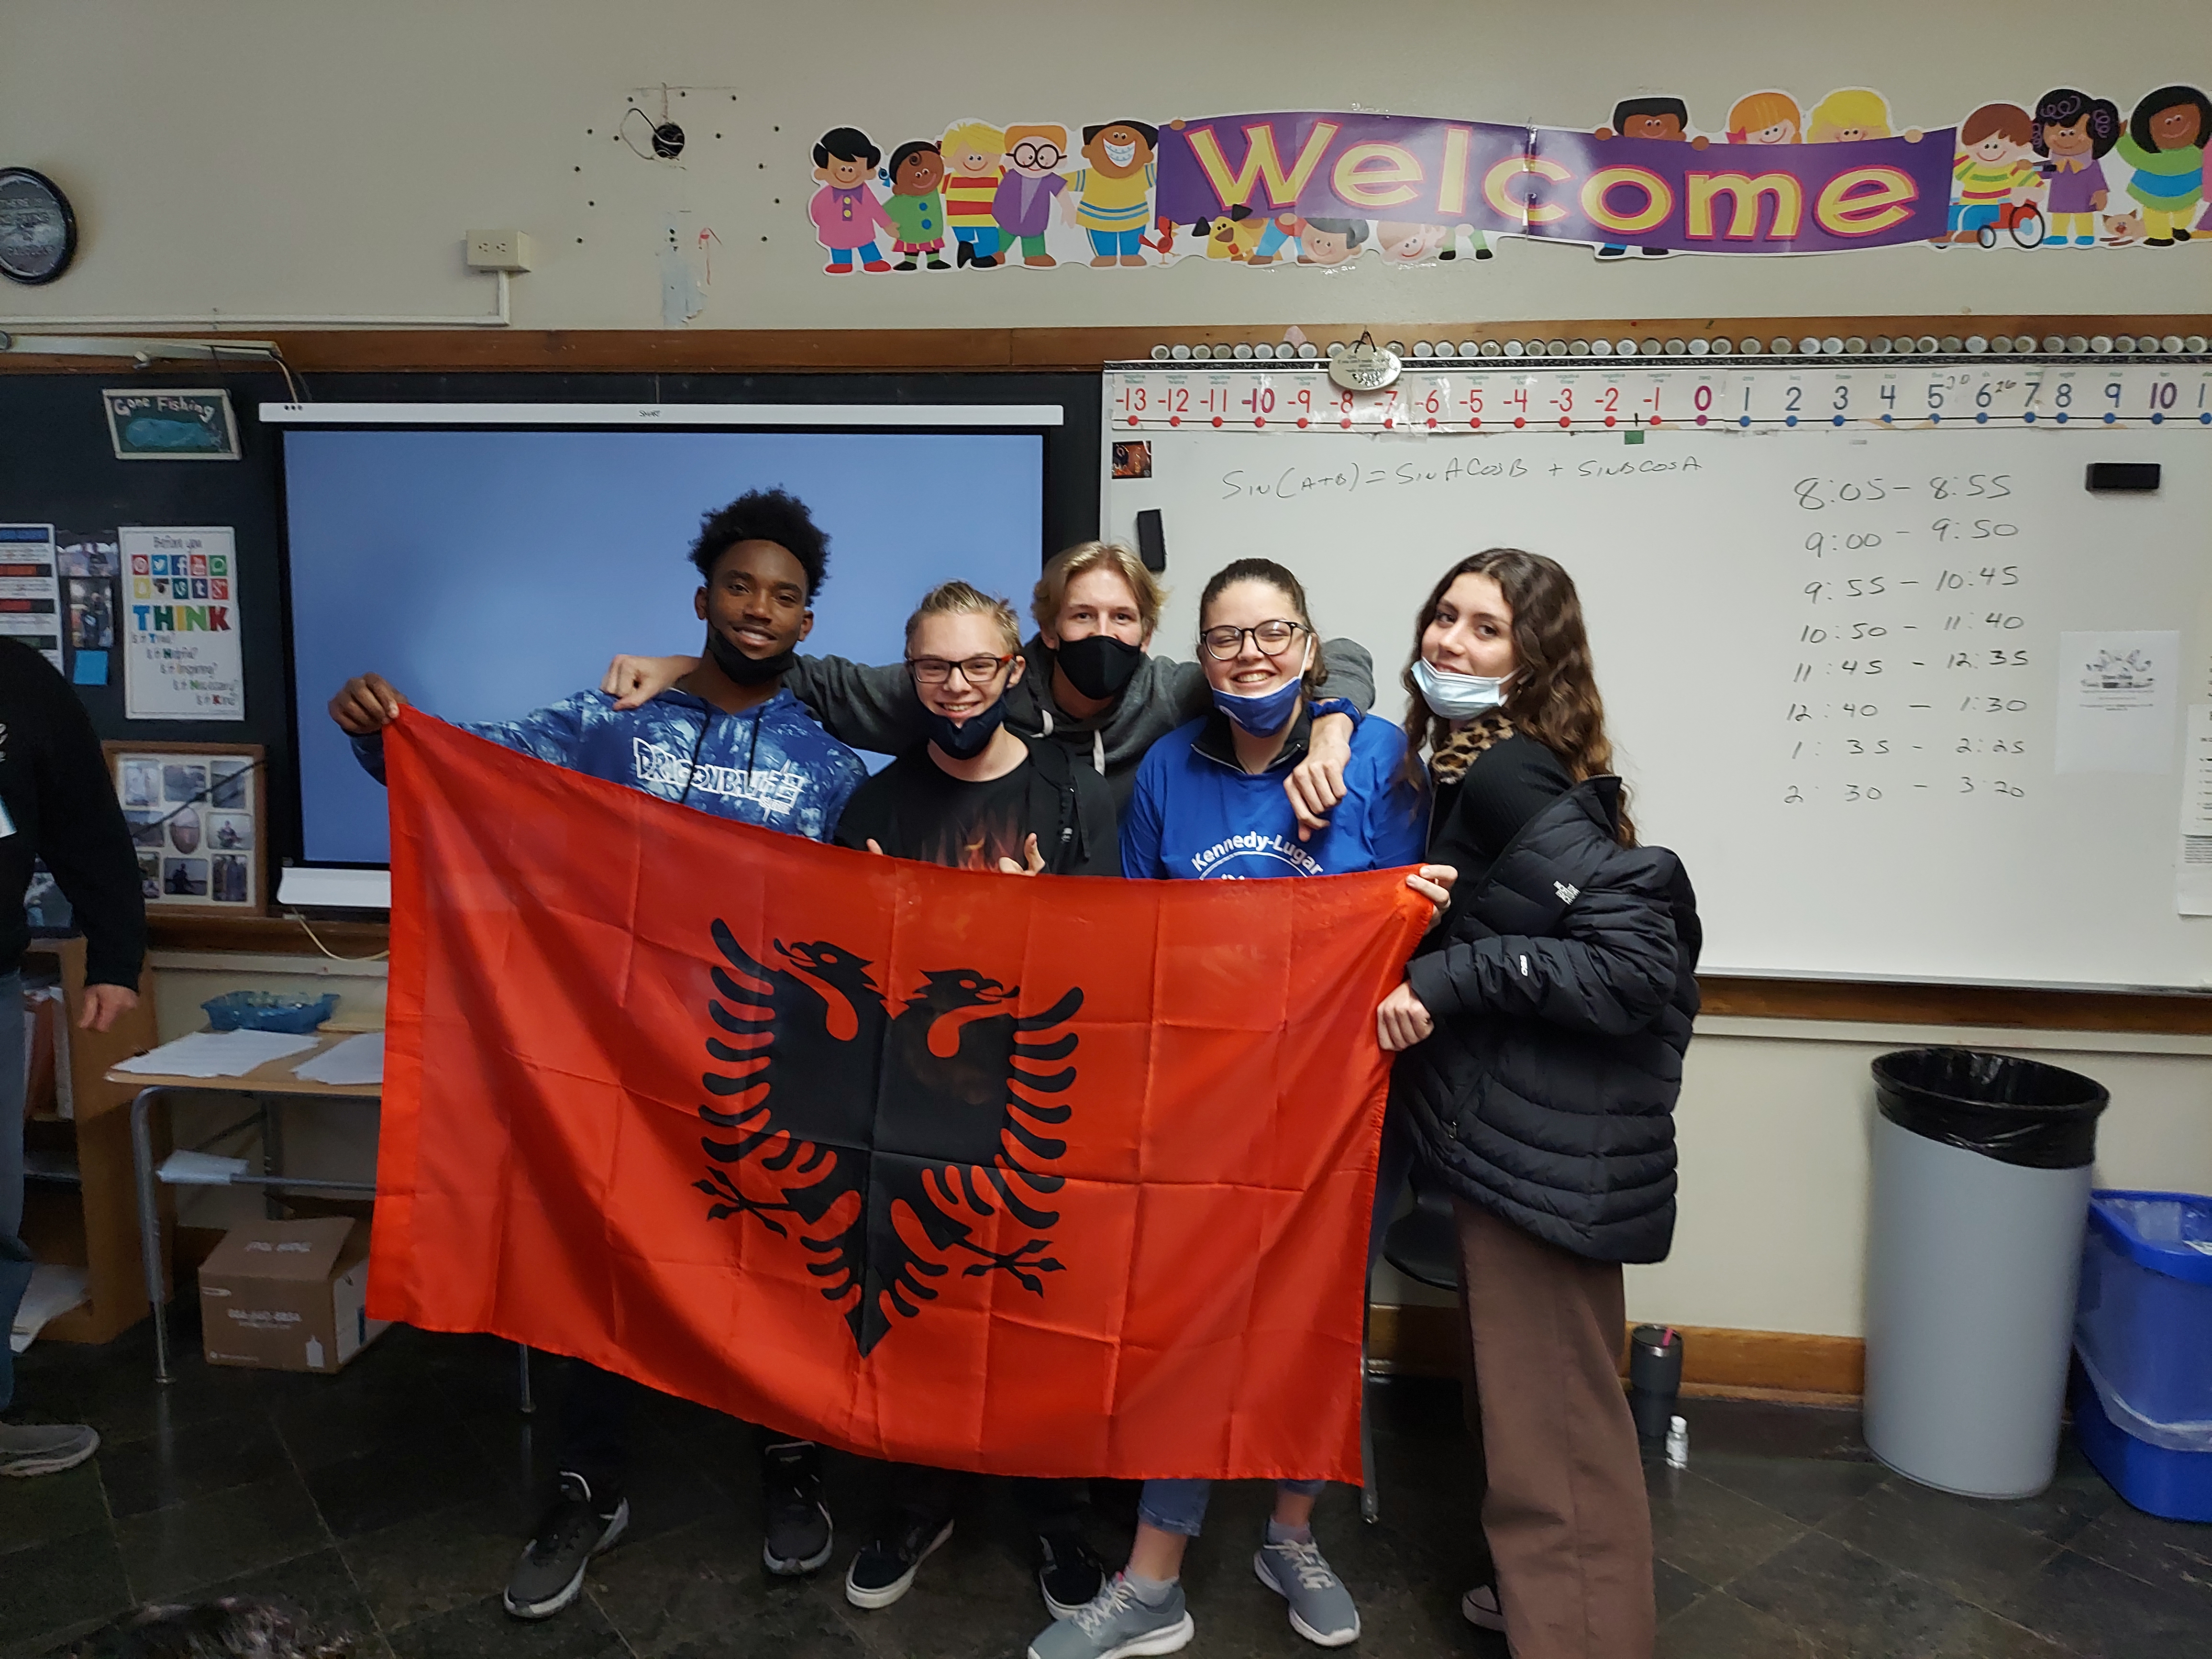 Mikea with classmates and albanian flag